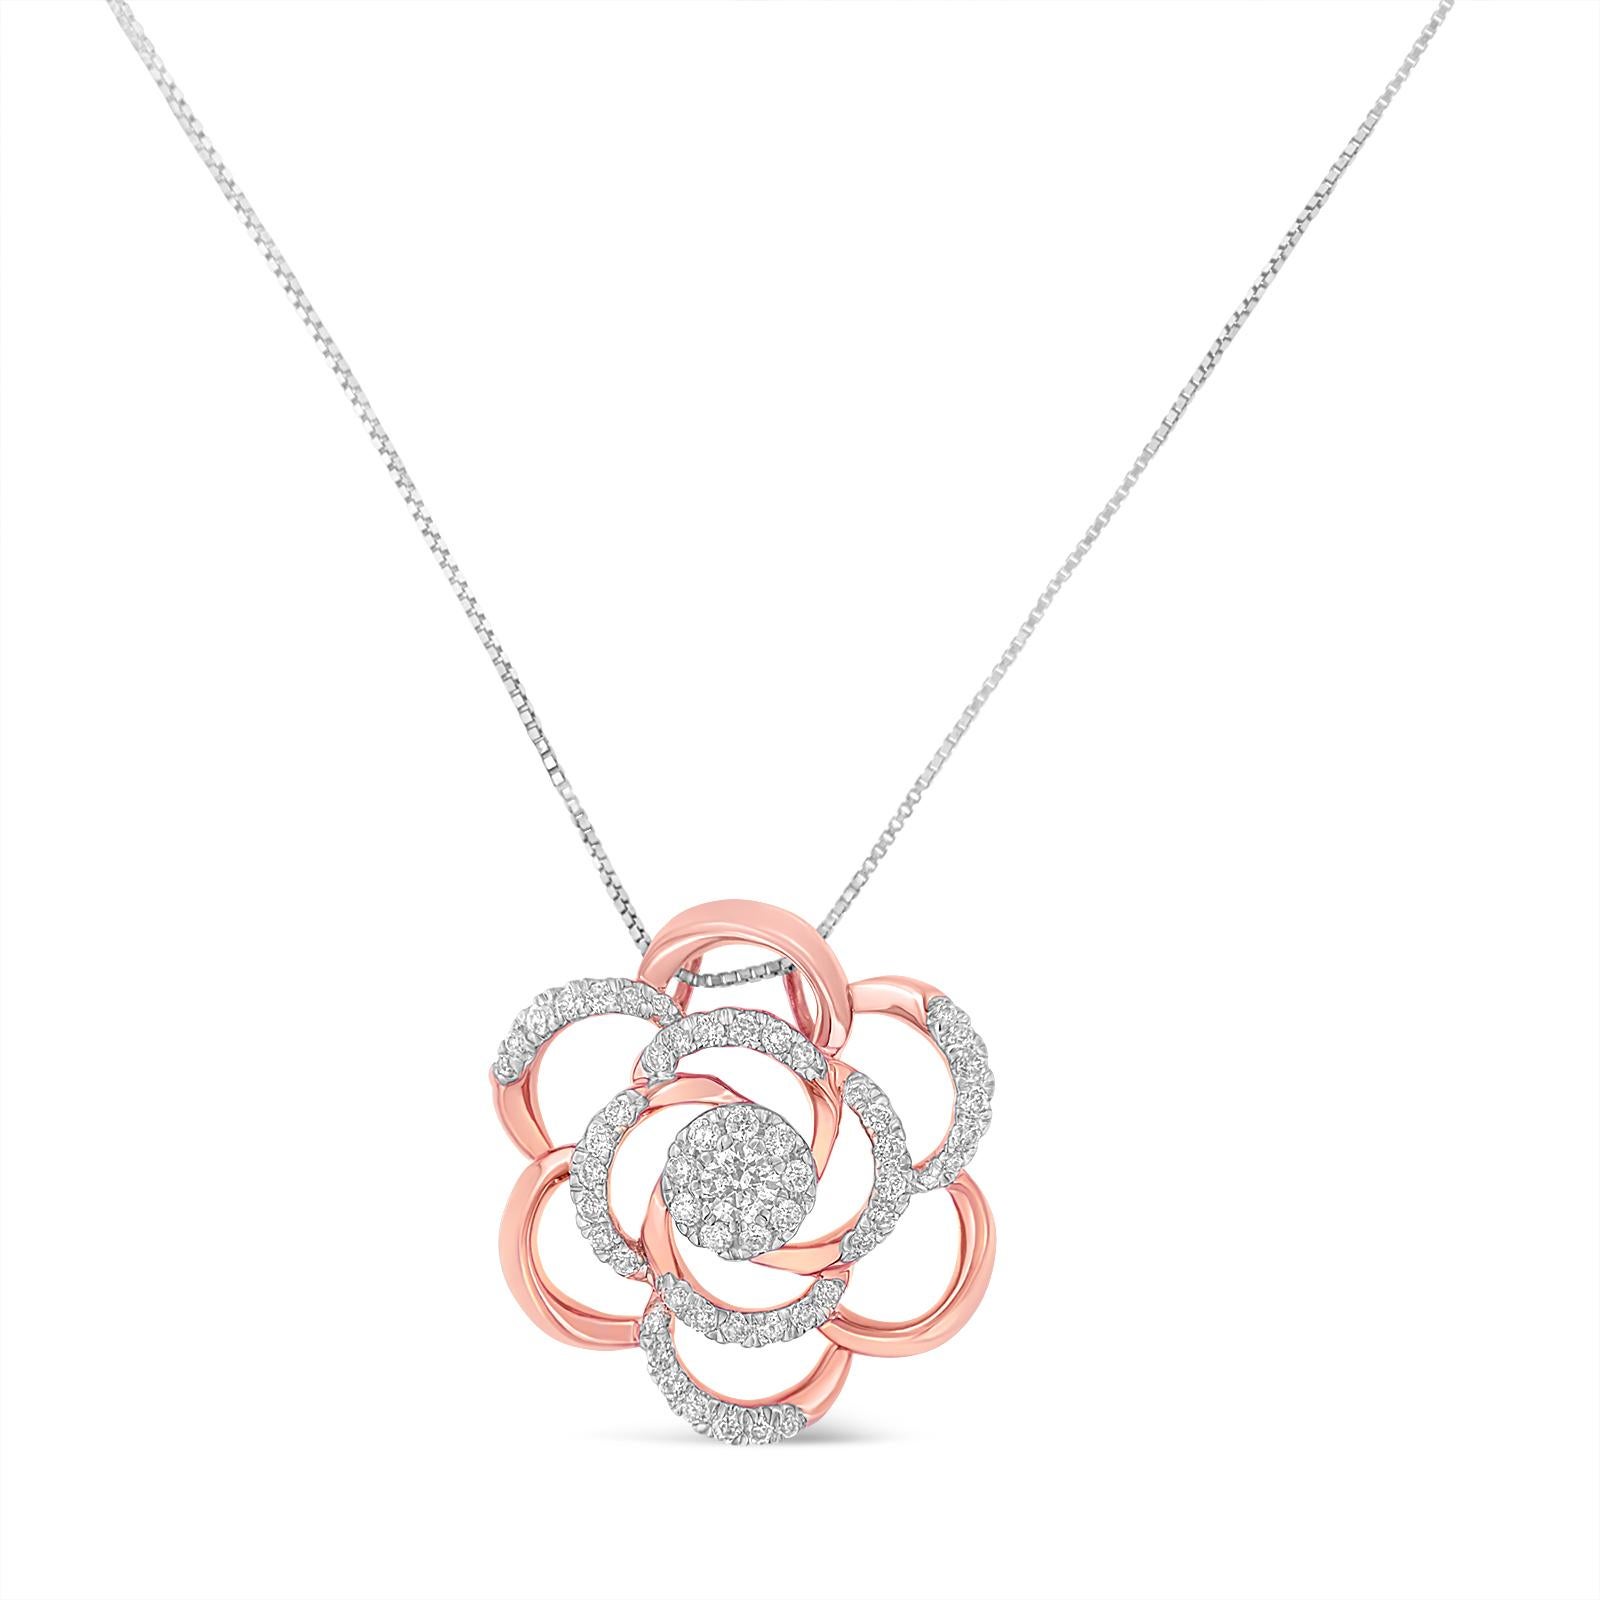 Define your look with this alluring diamond pendant. Formed in the shape of a flower, the pendant is created with ten karats gold and polished high to shine with rose gold plating. Featuring a flickering round cut diamond stone in the middle and on